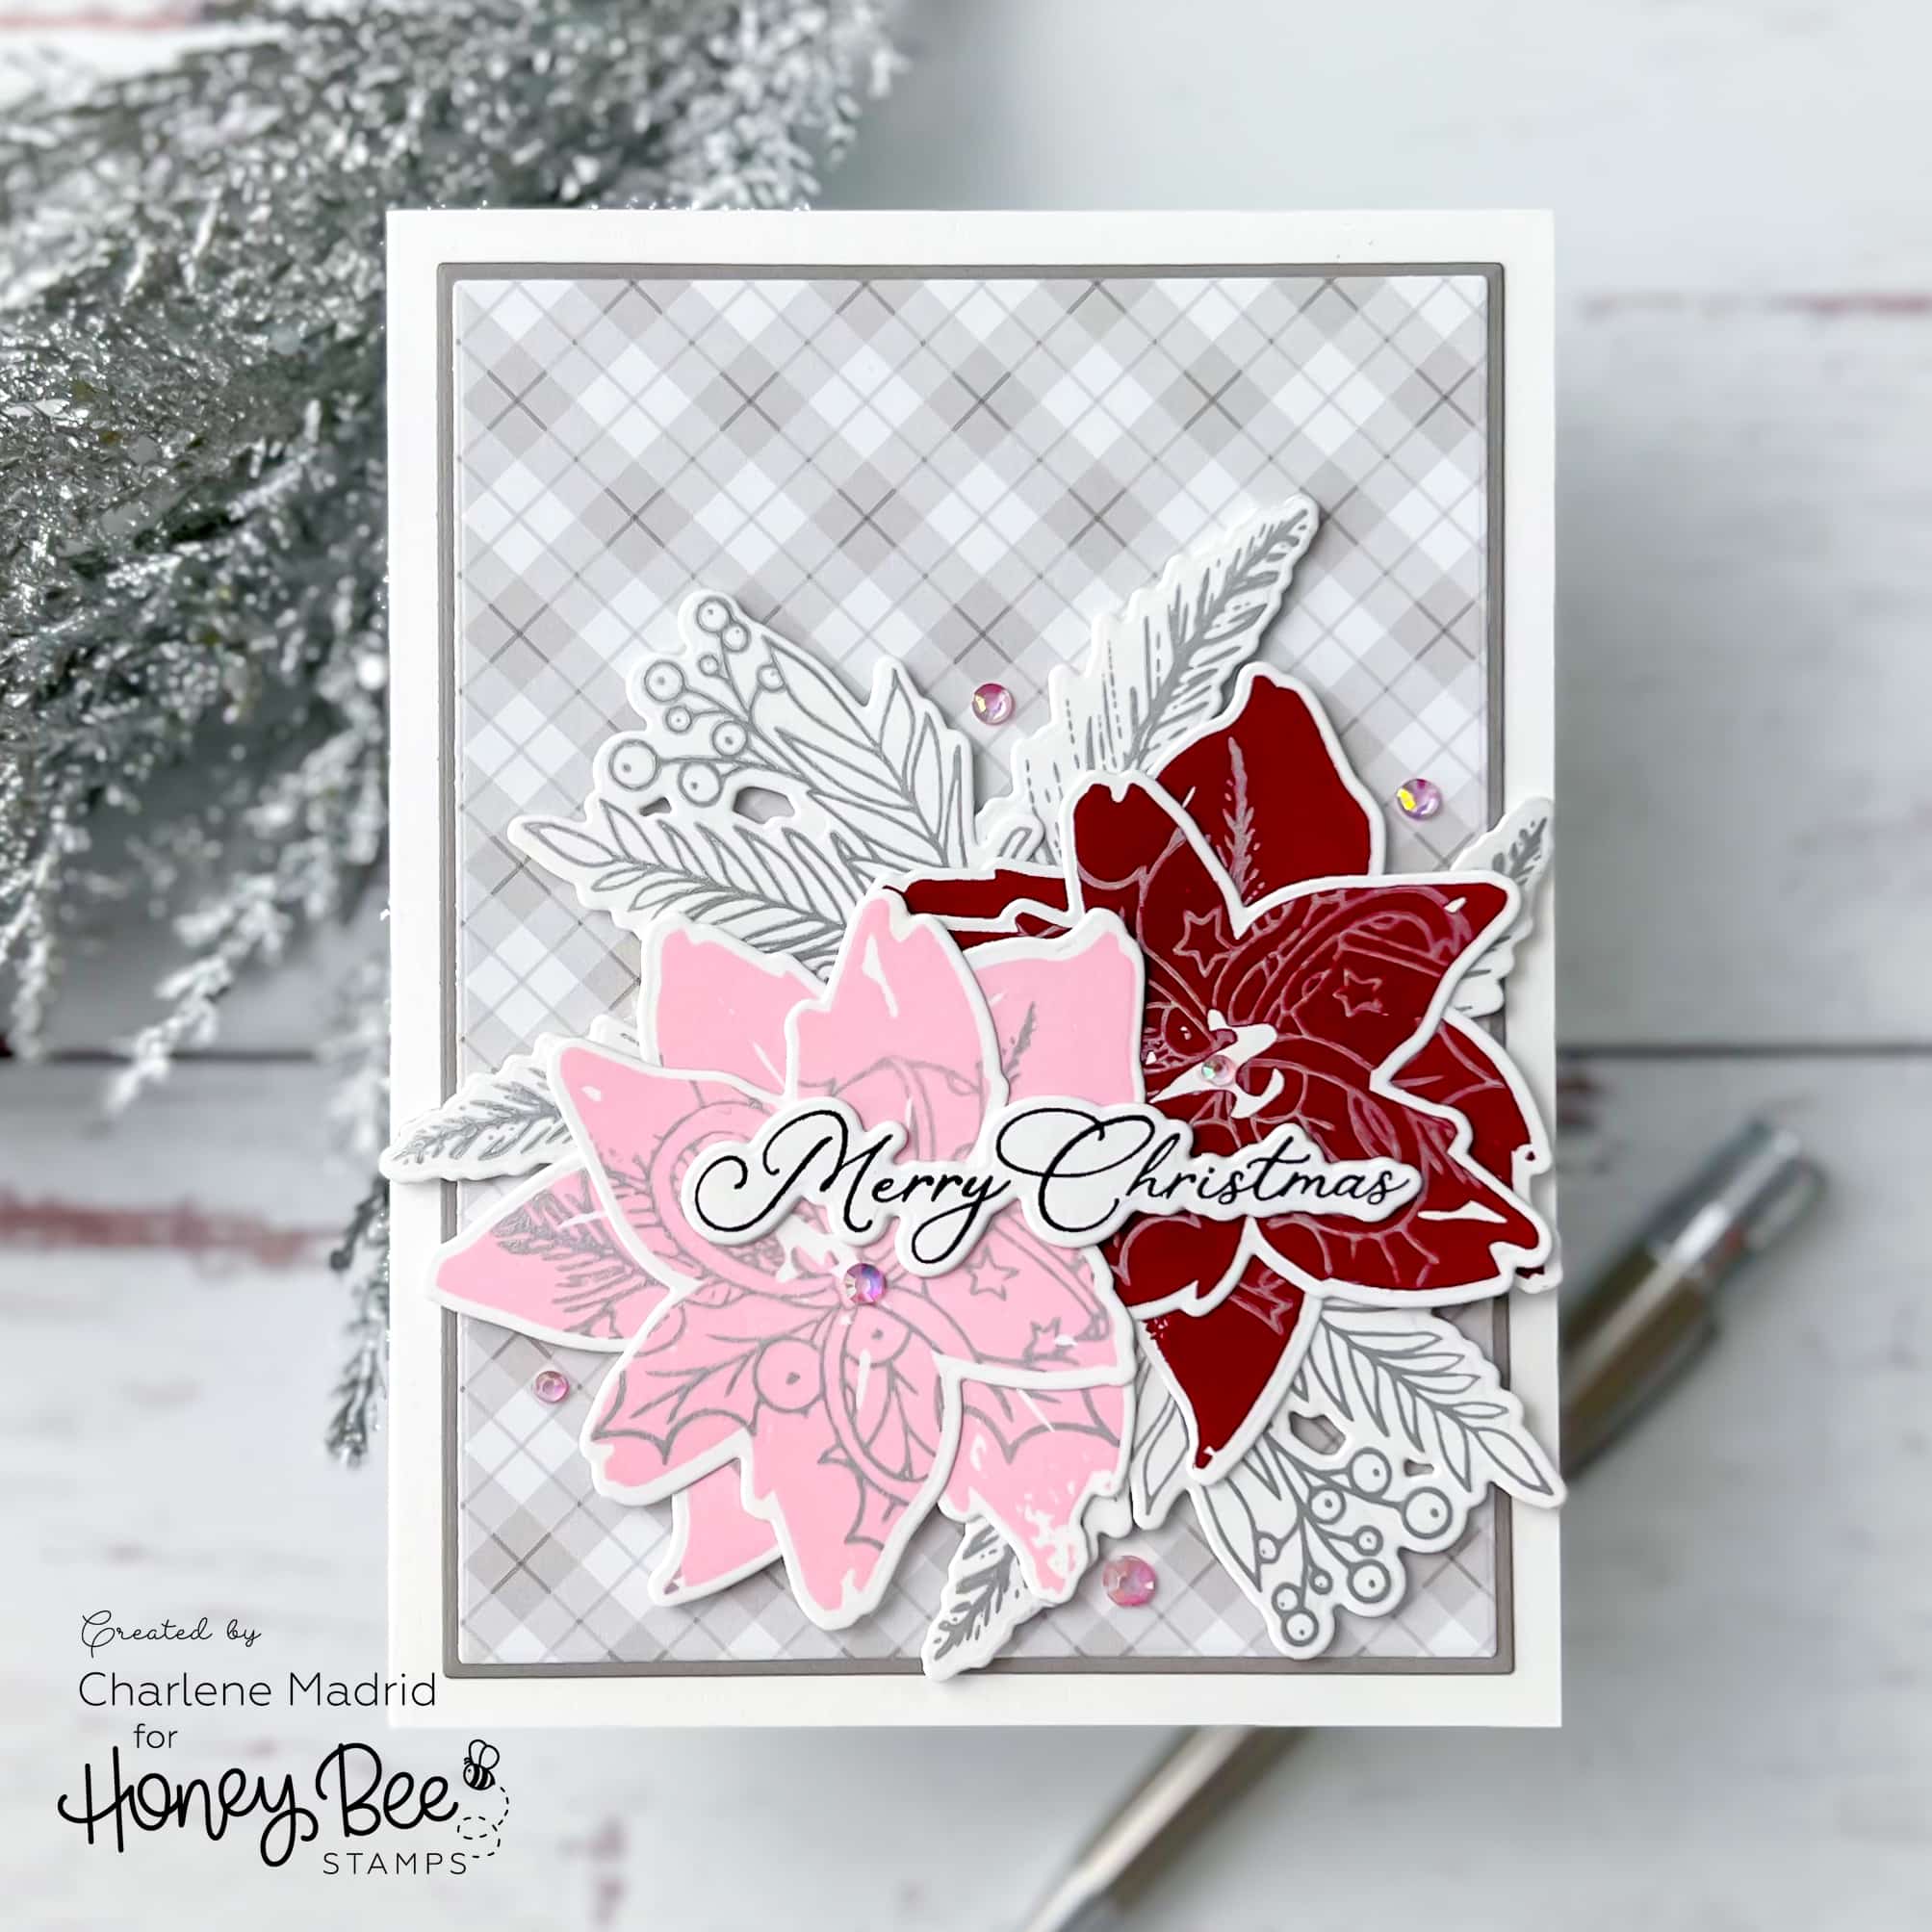 Honey Bee Stamps Winter Watercolor and Pine & Berry Centerpiece stamps